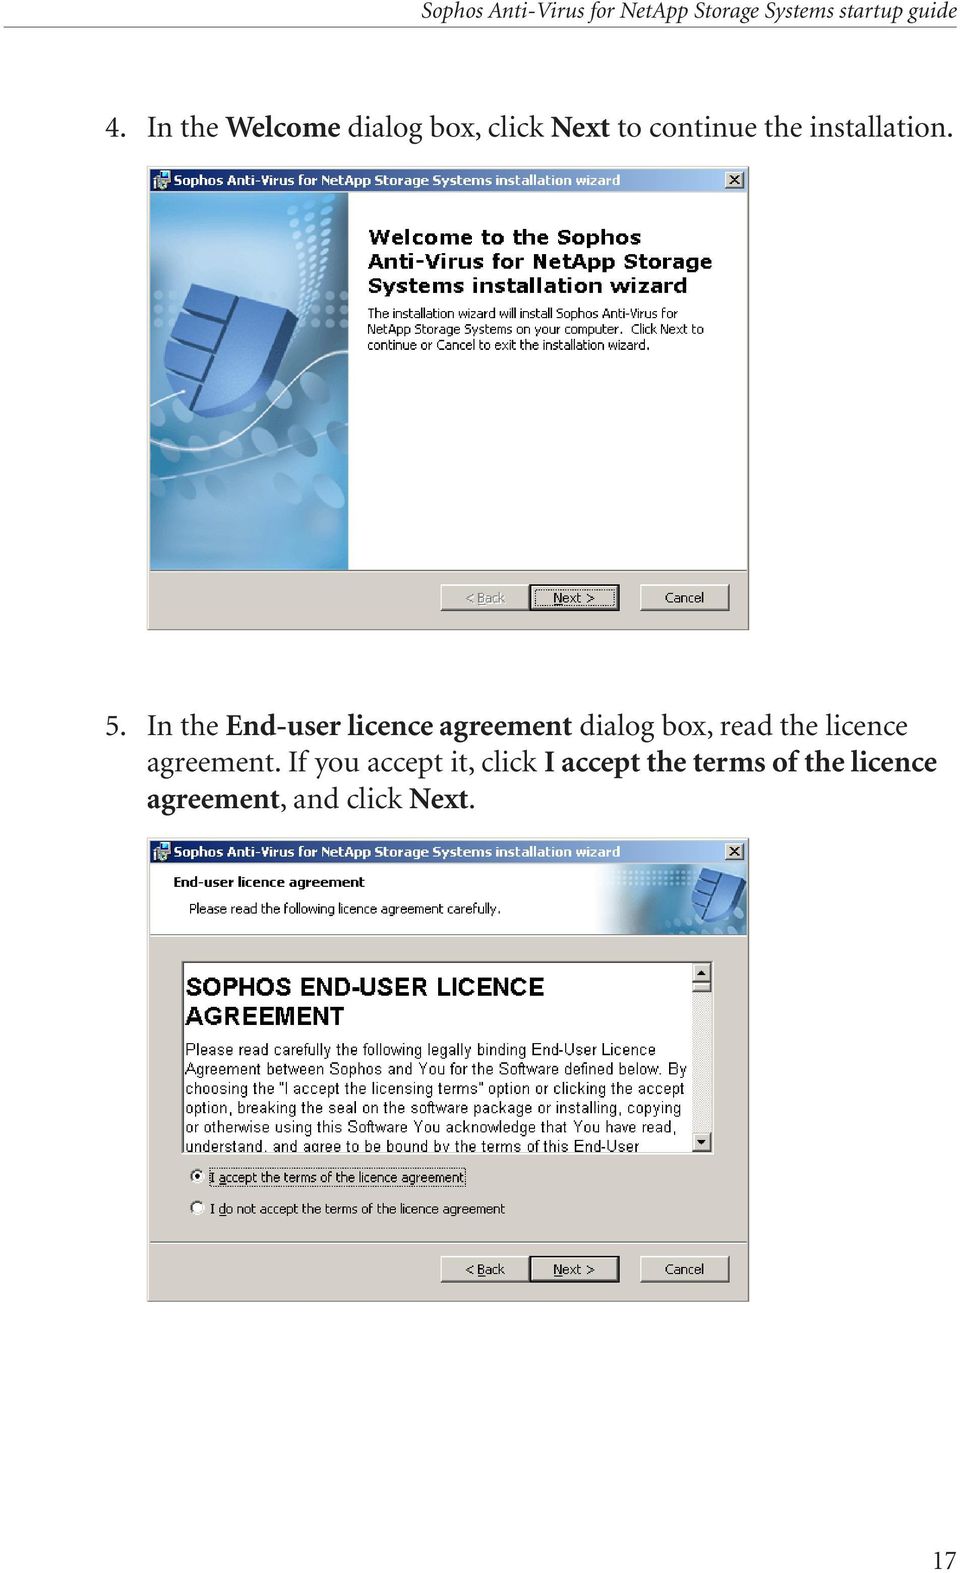 In the End user licence agreement dialog box, read the